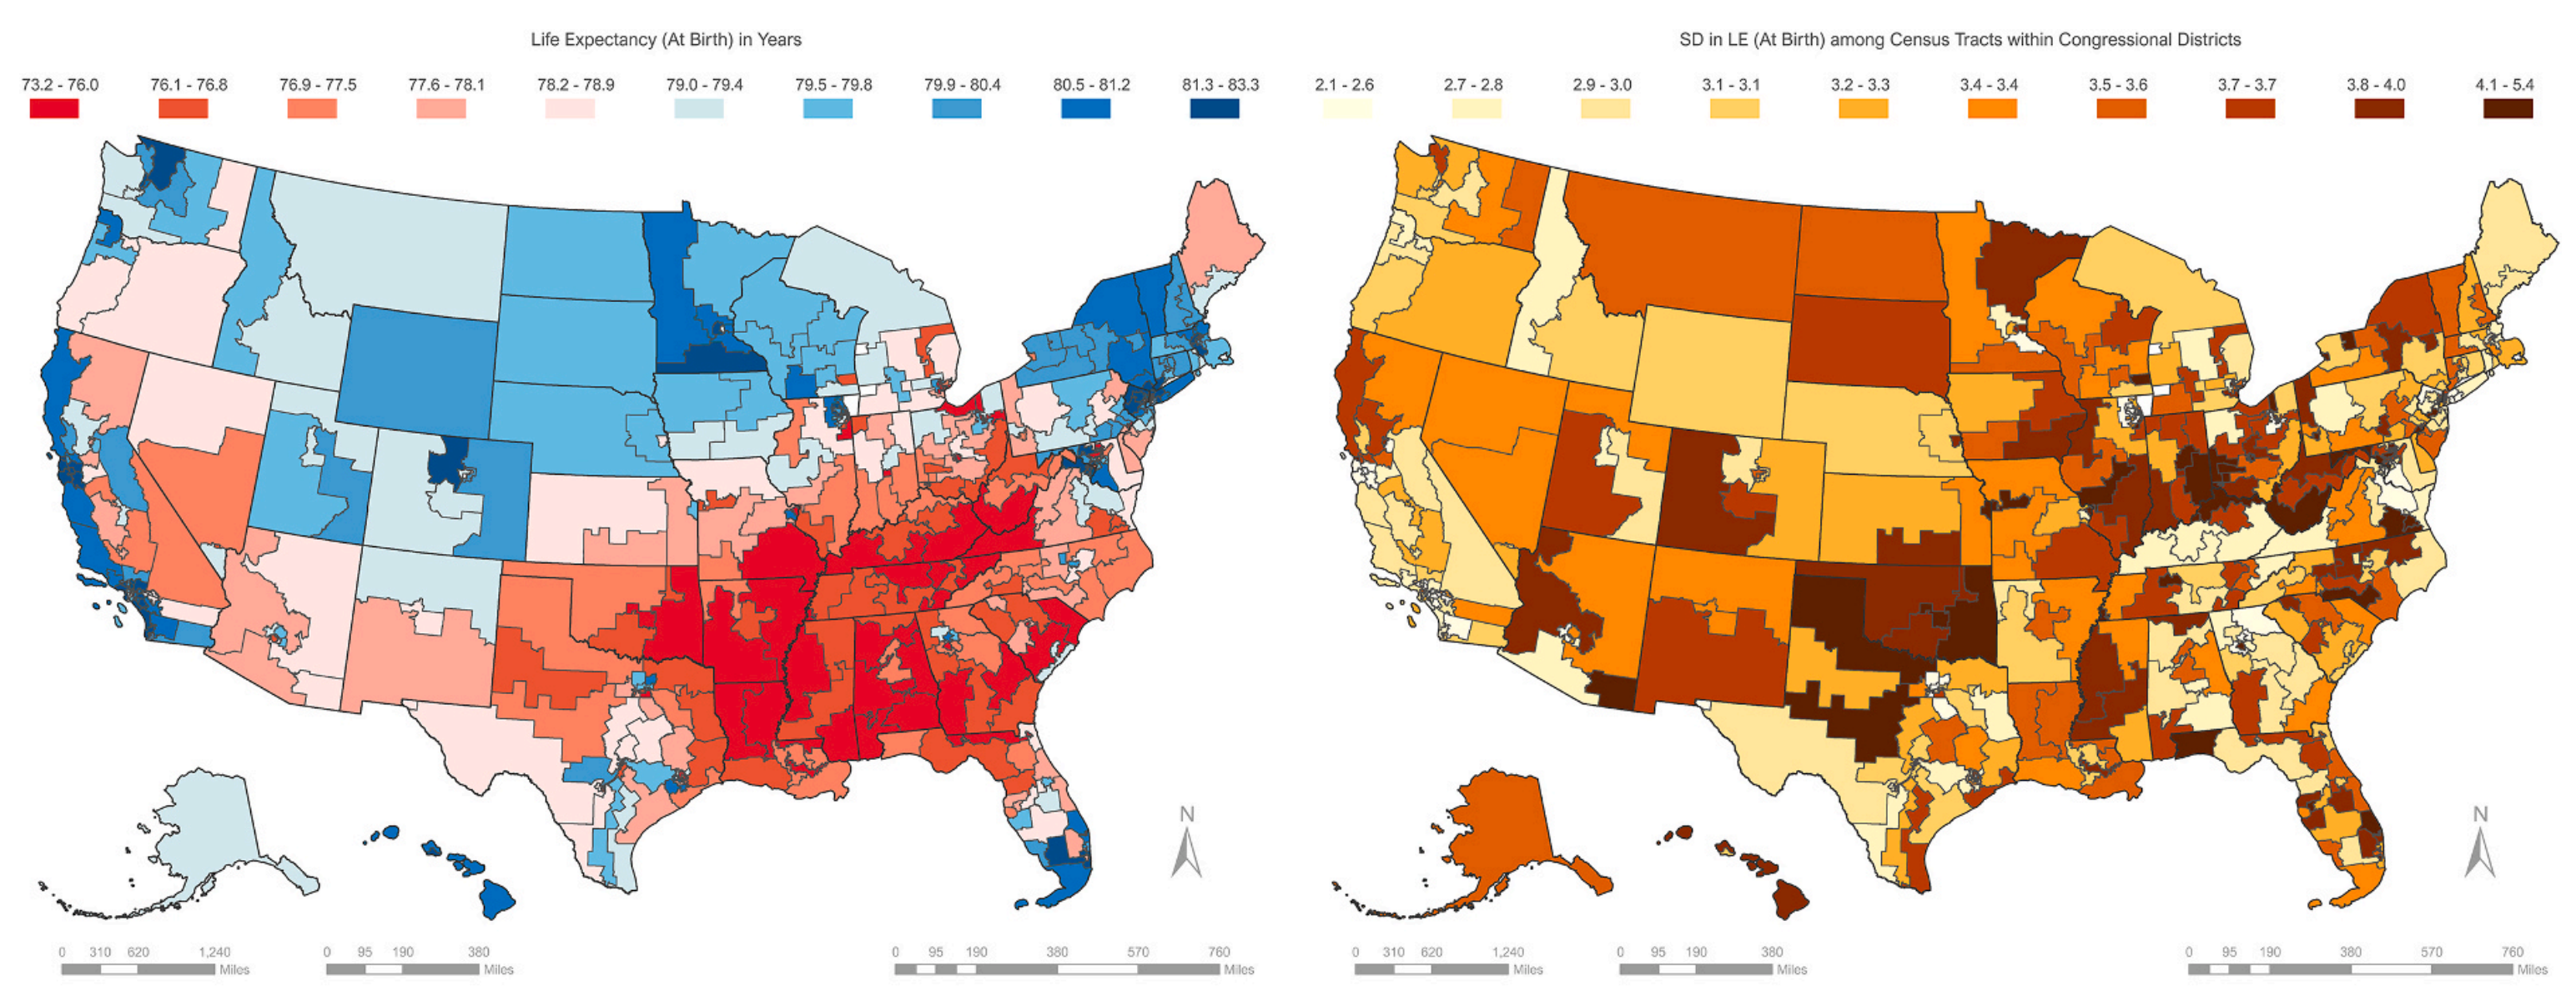 Life expectancies at birth and standard deviations in LE and across congressional districts in the United States, 2010-2015. Graphic: Takai, et al., 2022 / Social Science and Medicine